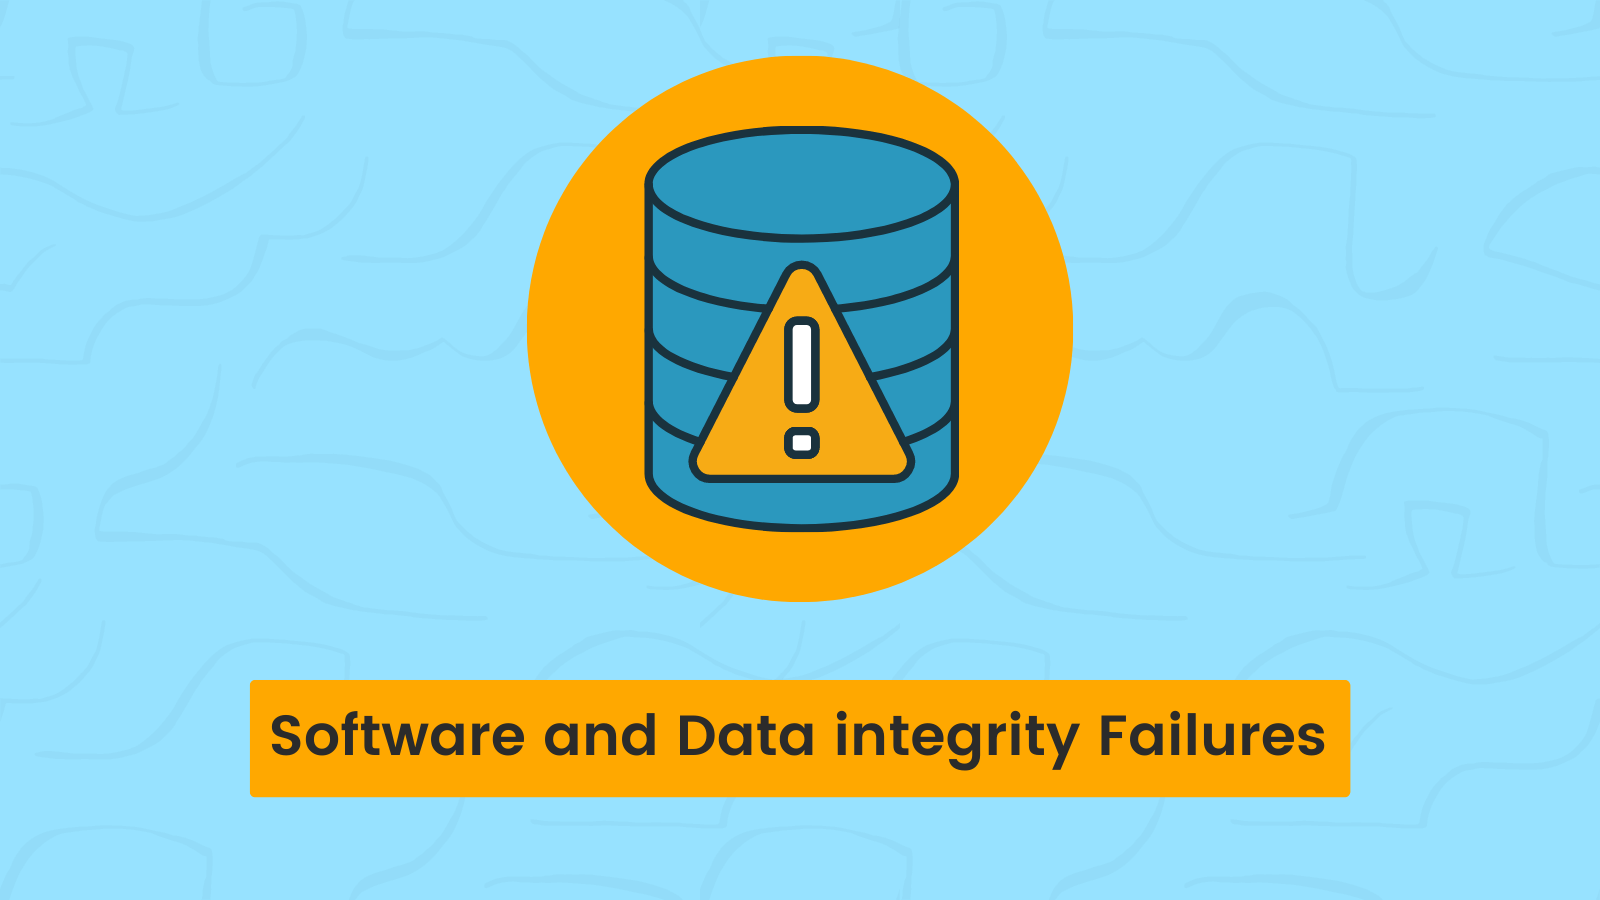 OWASP 10 - Software and Data integrity Failures